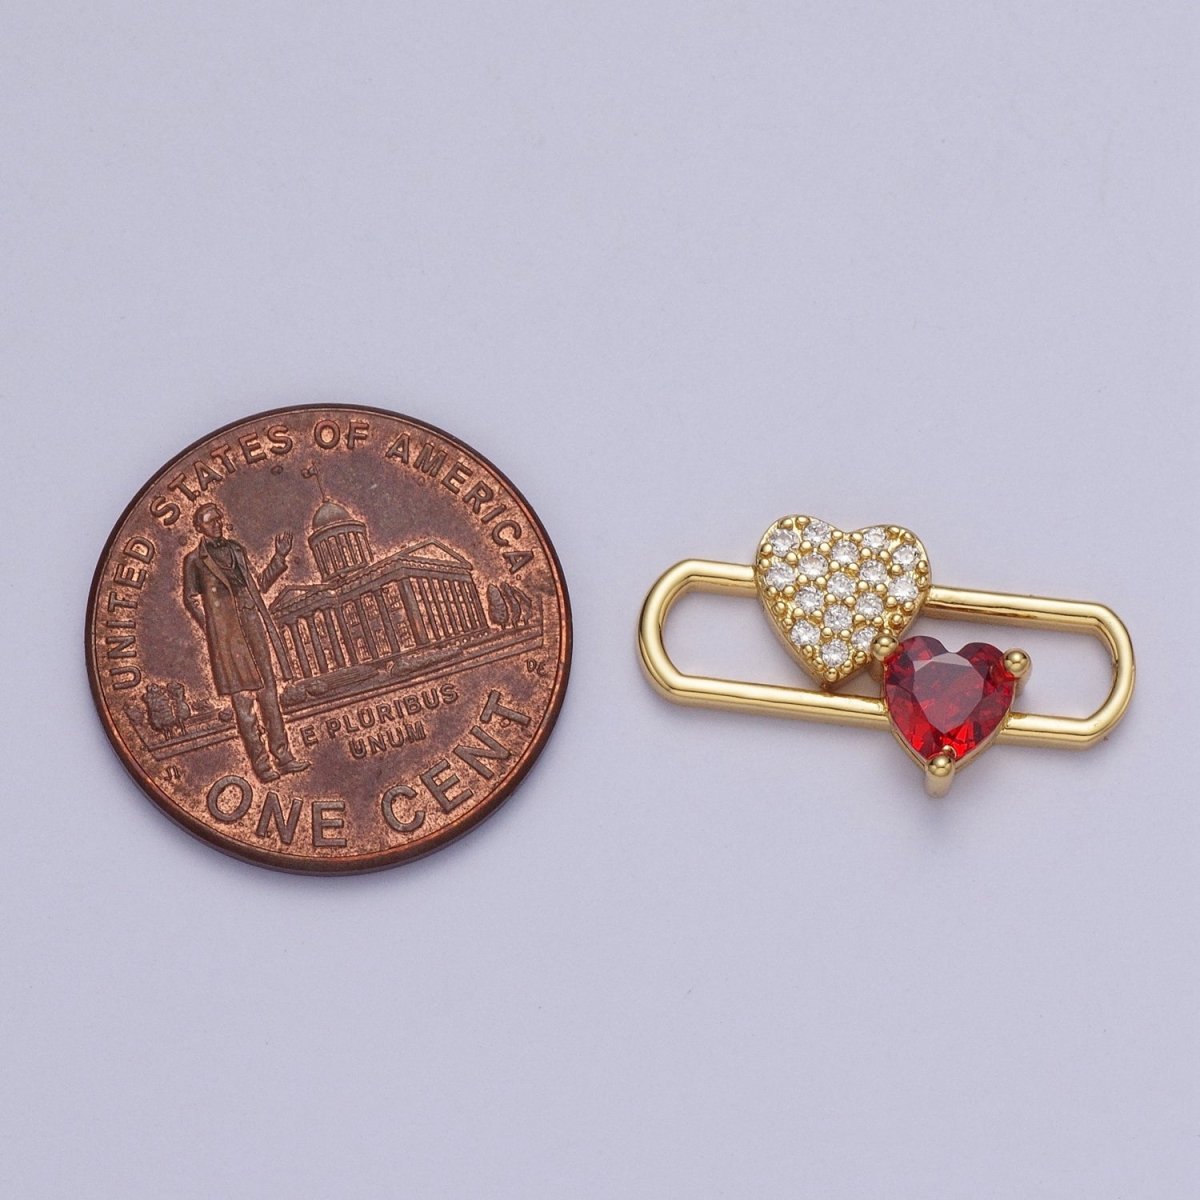 24K Gold Filled Heart Love Pin Charm, Micro Pave Red Cubic Zirconia Love Heart AG-110 - DLUXCA